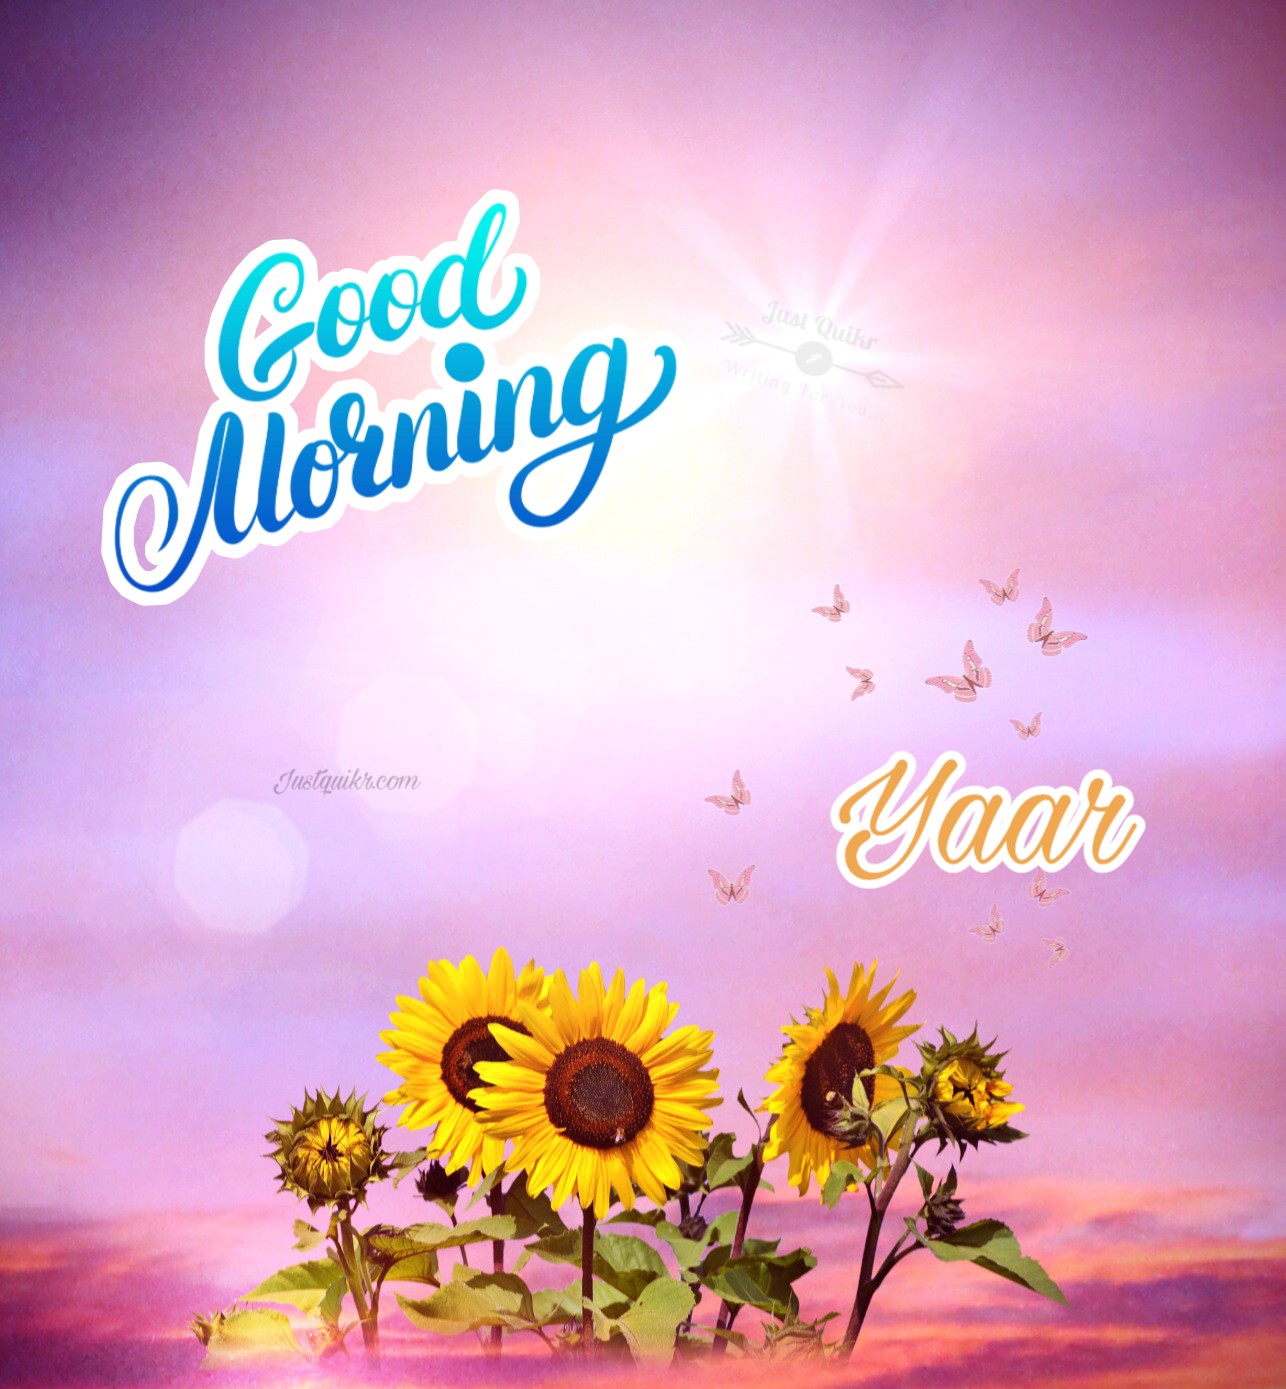 Good Morning Yaar Messages Wishes Shayari SMS HD Pics Images Photo Wallpaper for Whatsapp Instagram And  Facebook